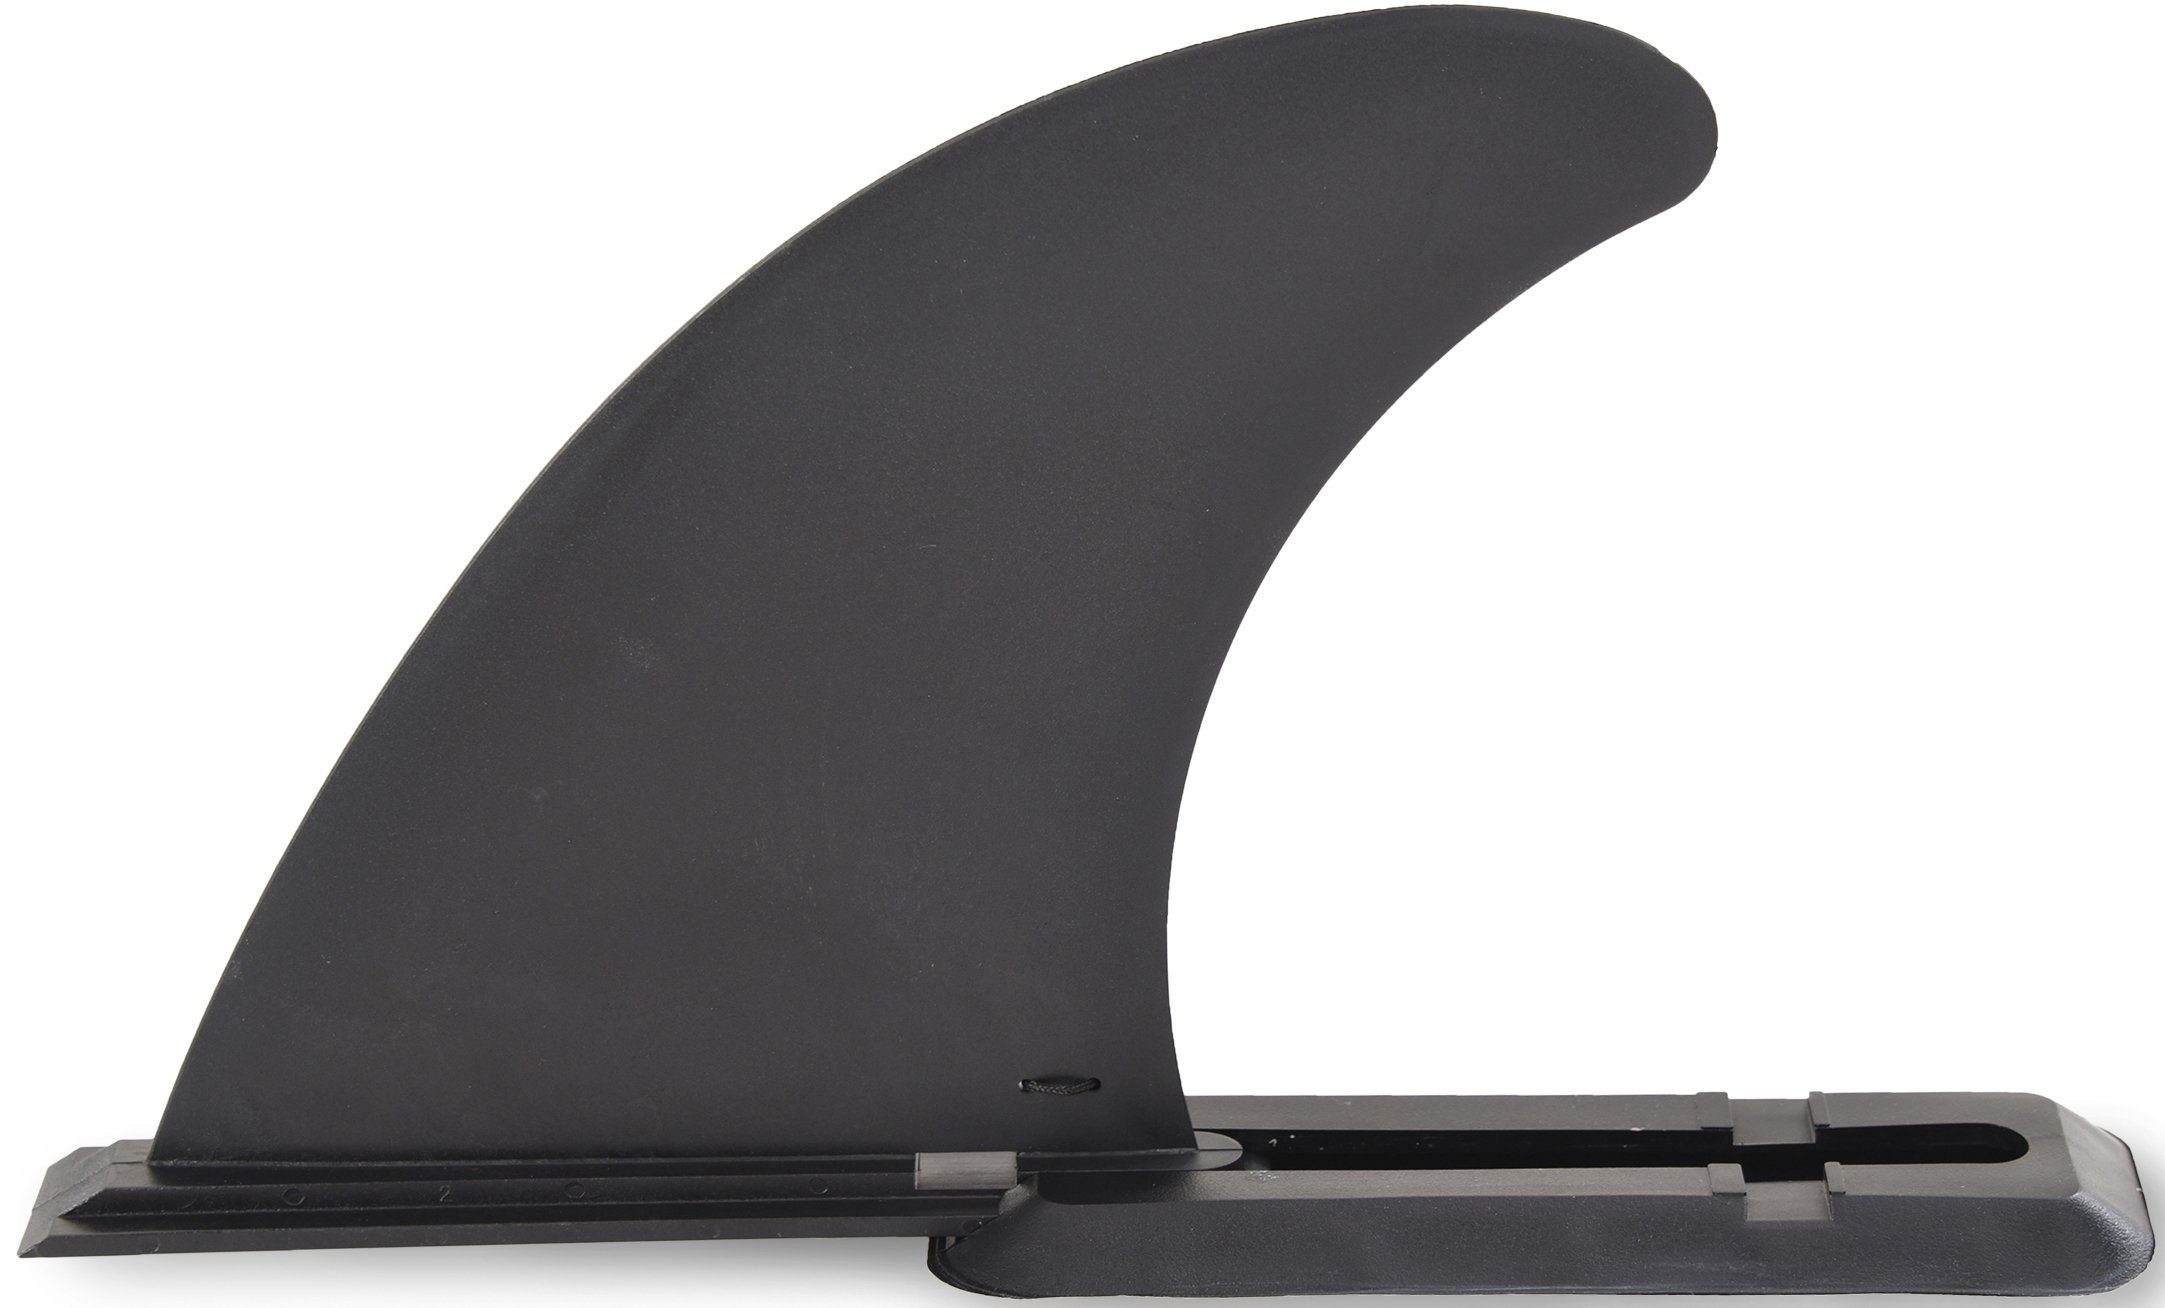 Free, Stand Feel SUP-Board Paddling Up F2